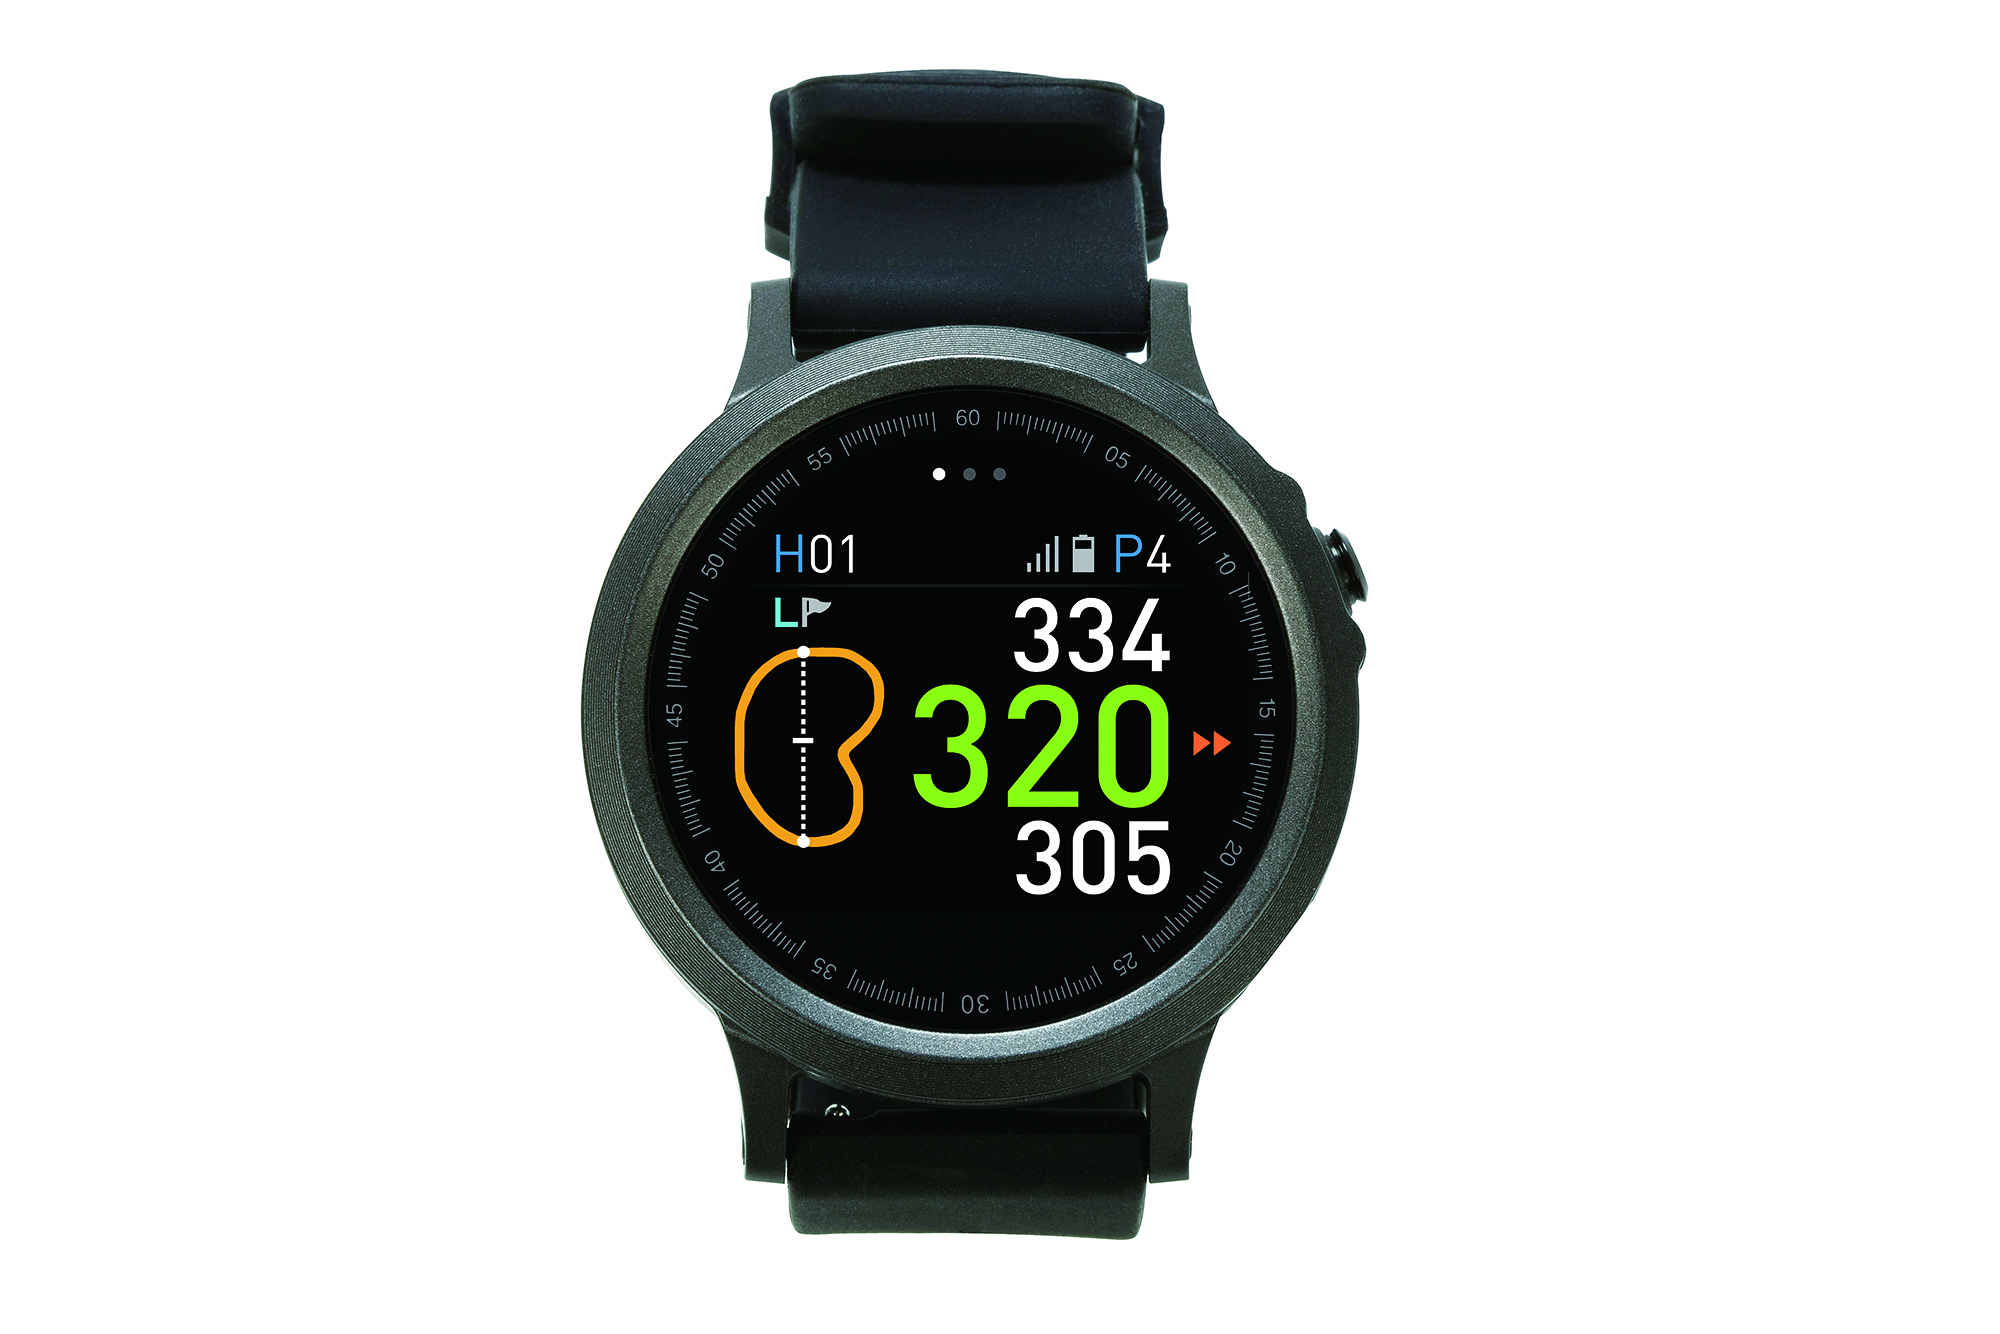 GolfBuddy launches WTX and WT6 GPS watches